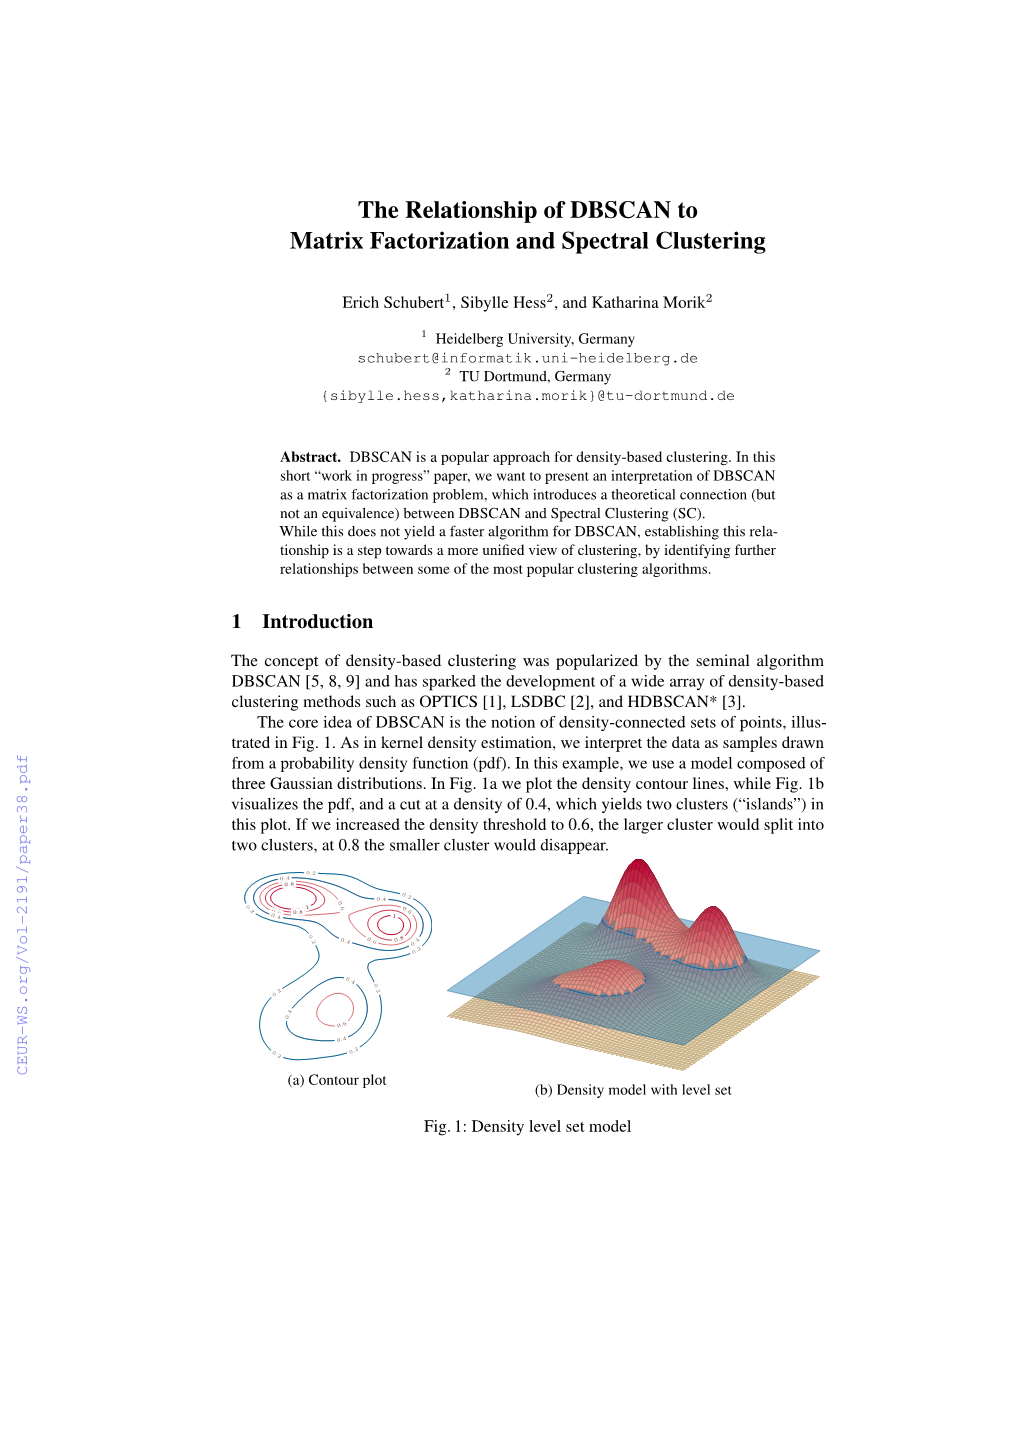 The Relationship of DBSCAN to Matrix Factorization and Spectral Clustering